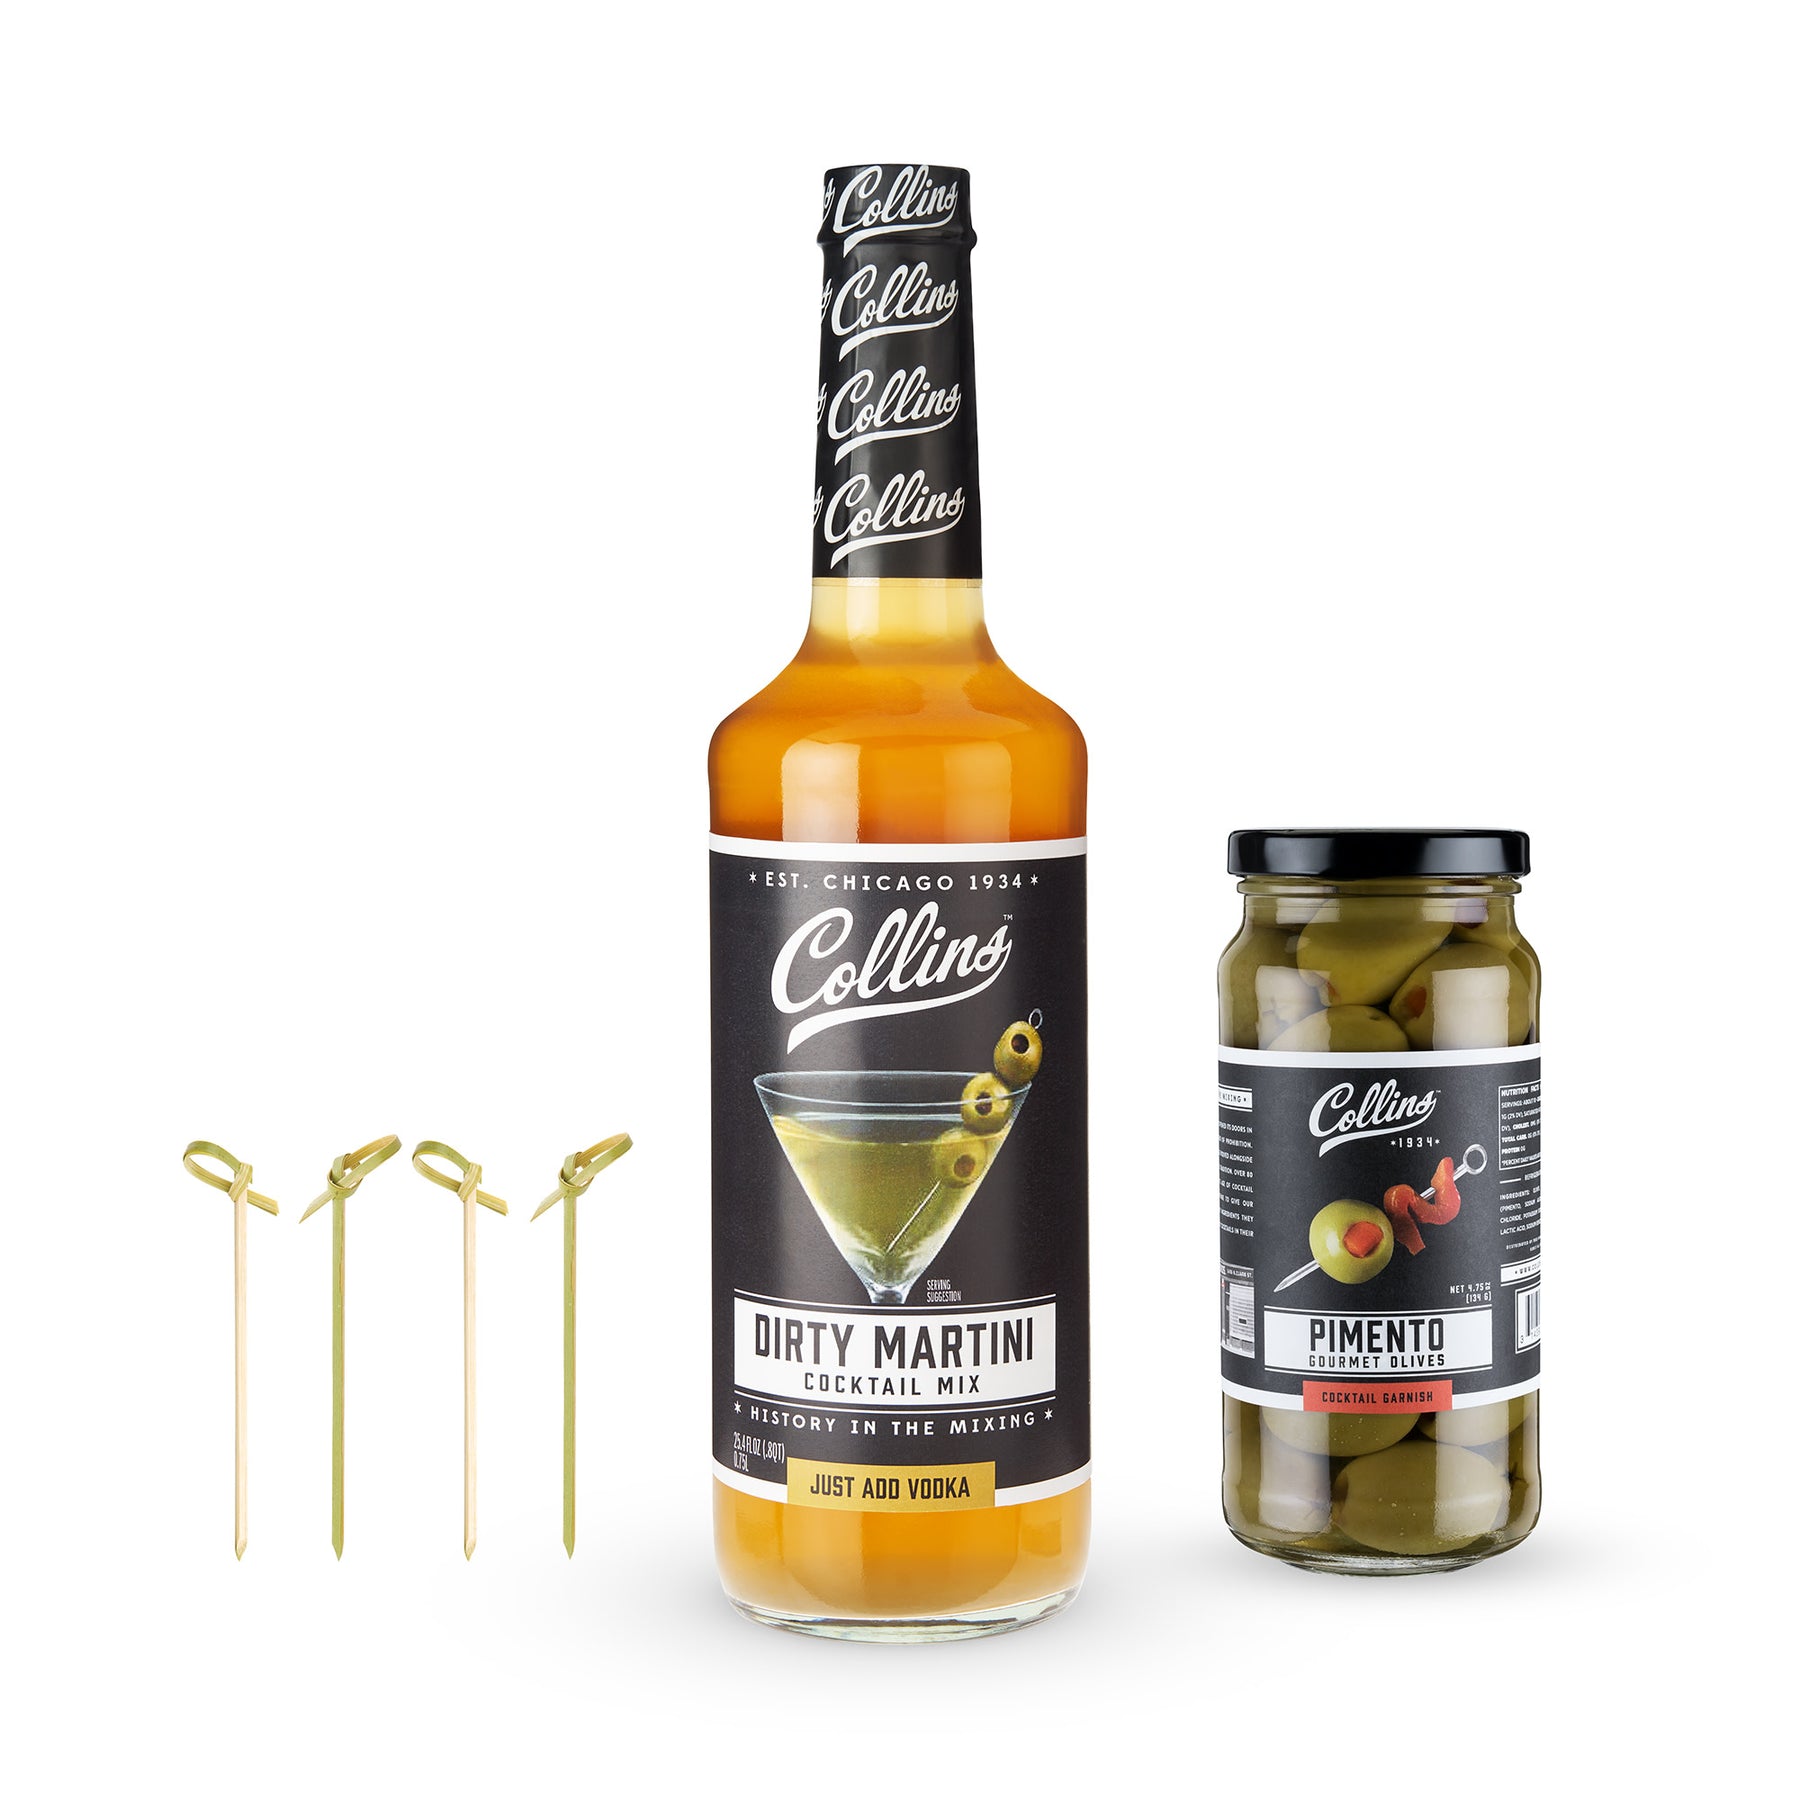 Cocktail Crate Whiskey Sour (12.7oz)